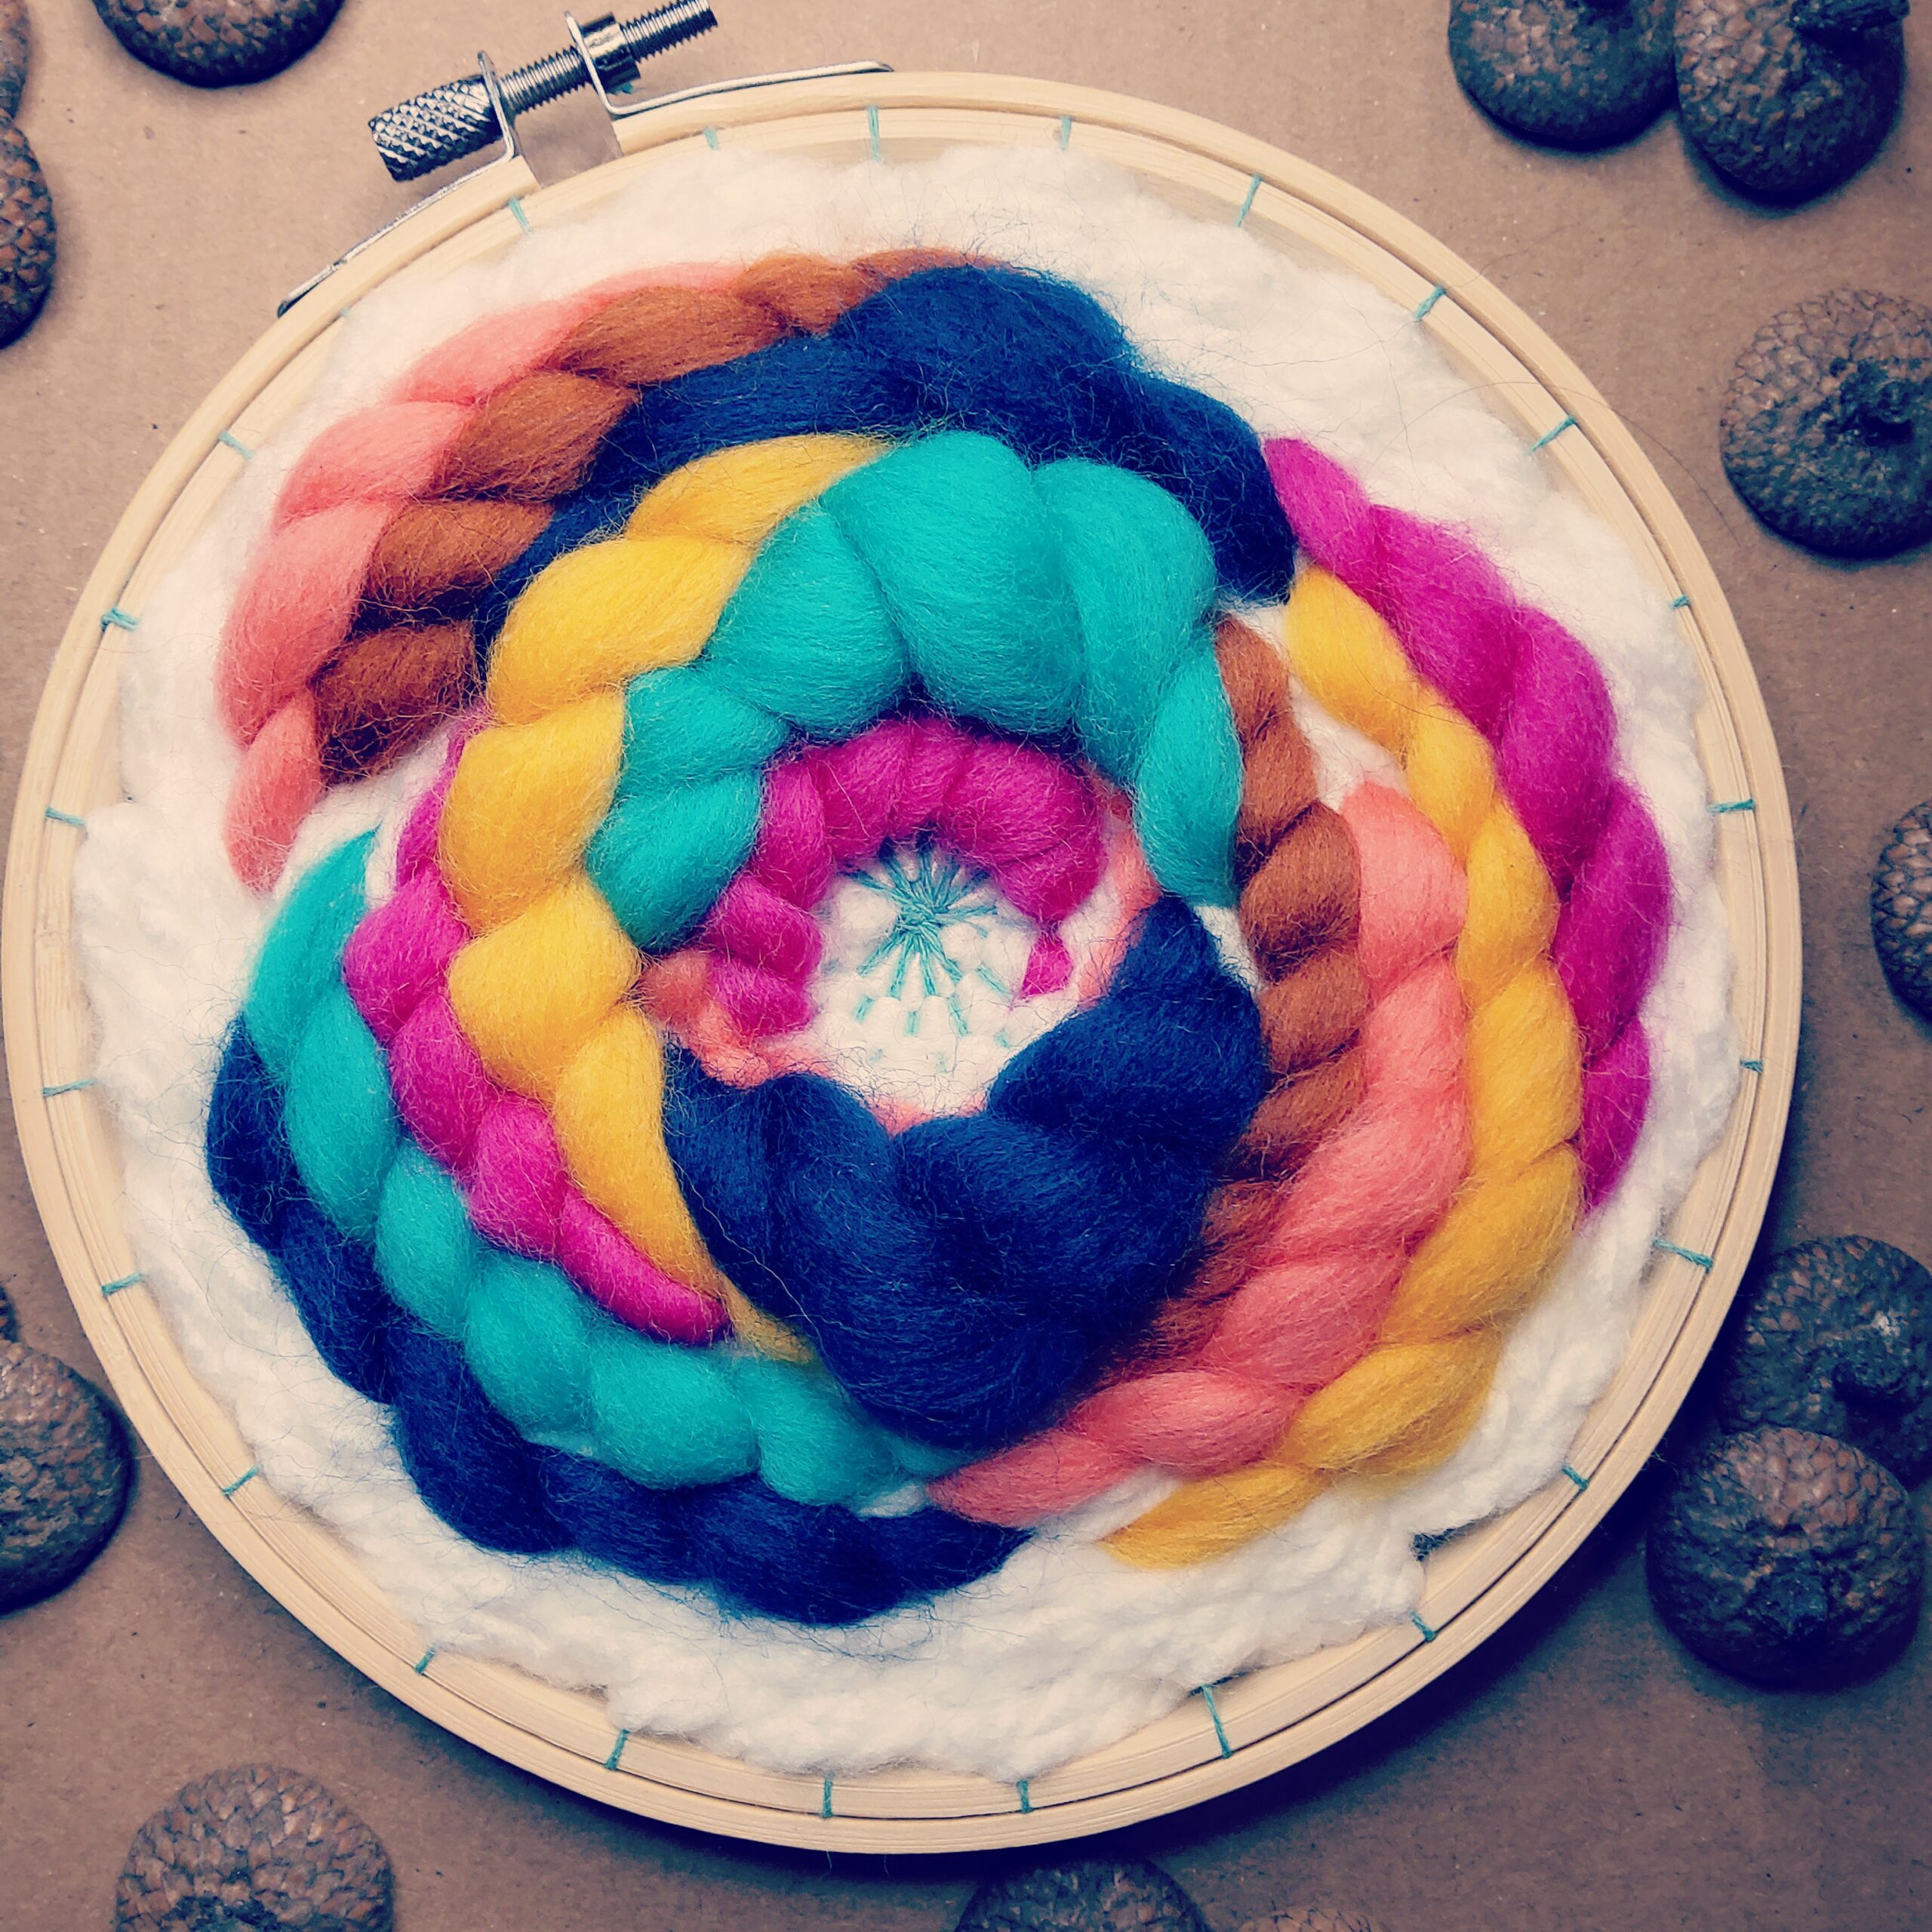 colored yarn arranged in a circle